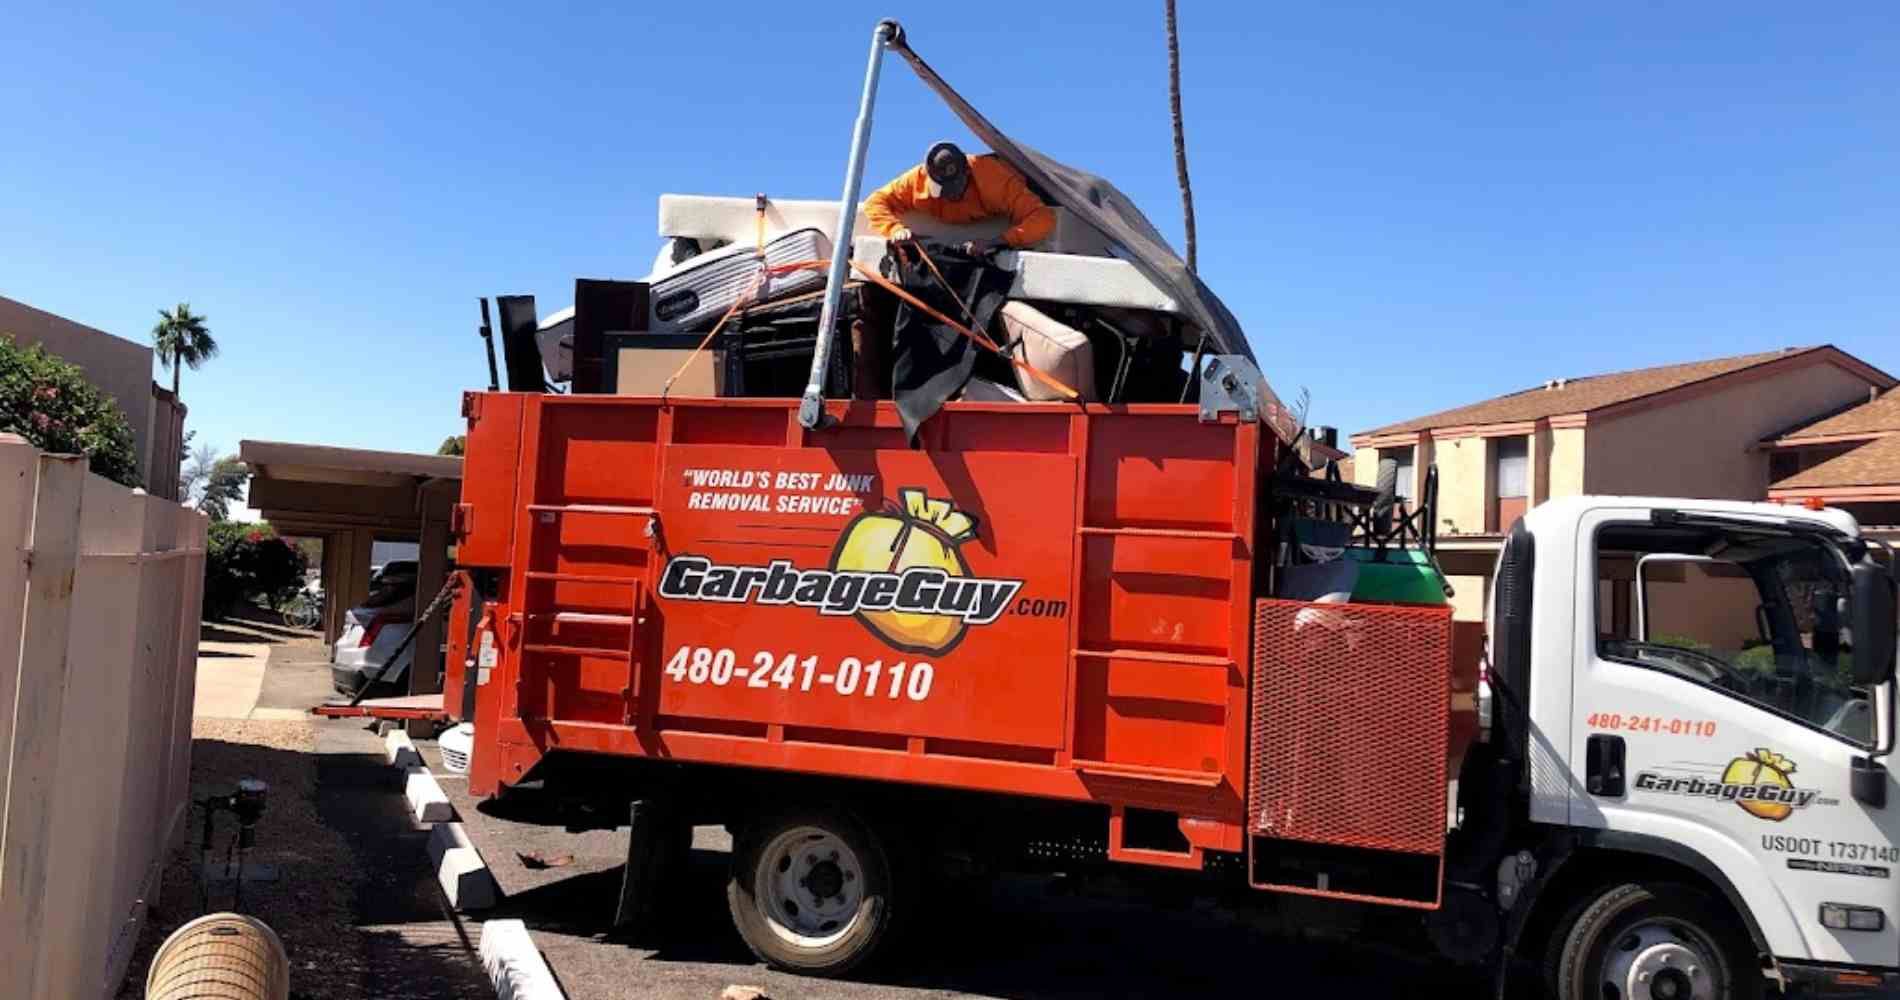 #1 for Furniture Removal in Gilbert, AZ With Over 1200 5-Star Reviews!